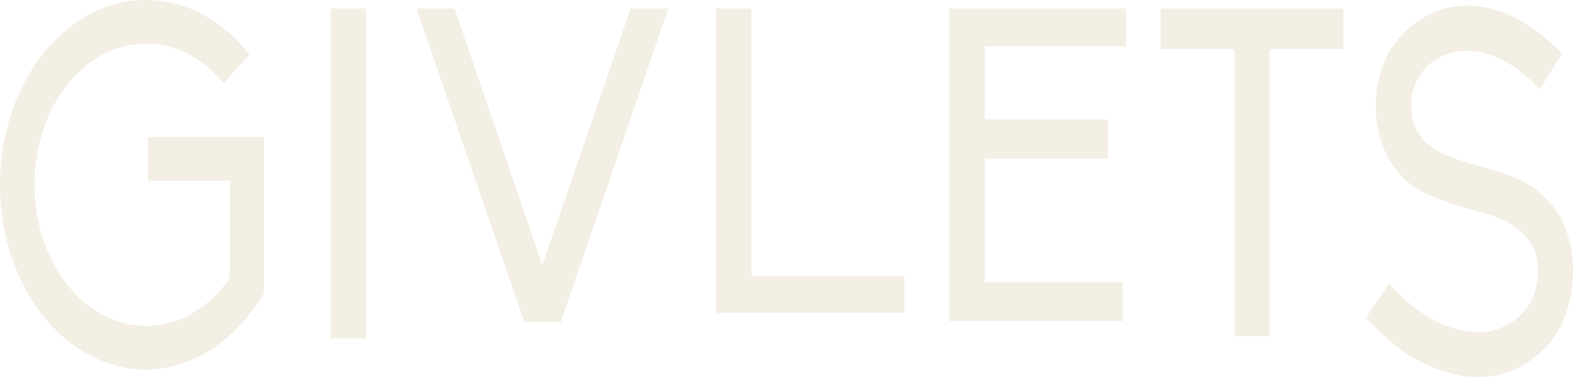 26-logo-words-only---light.png